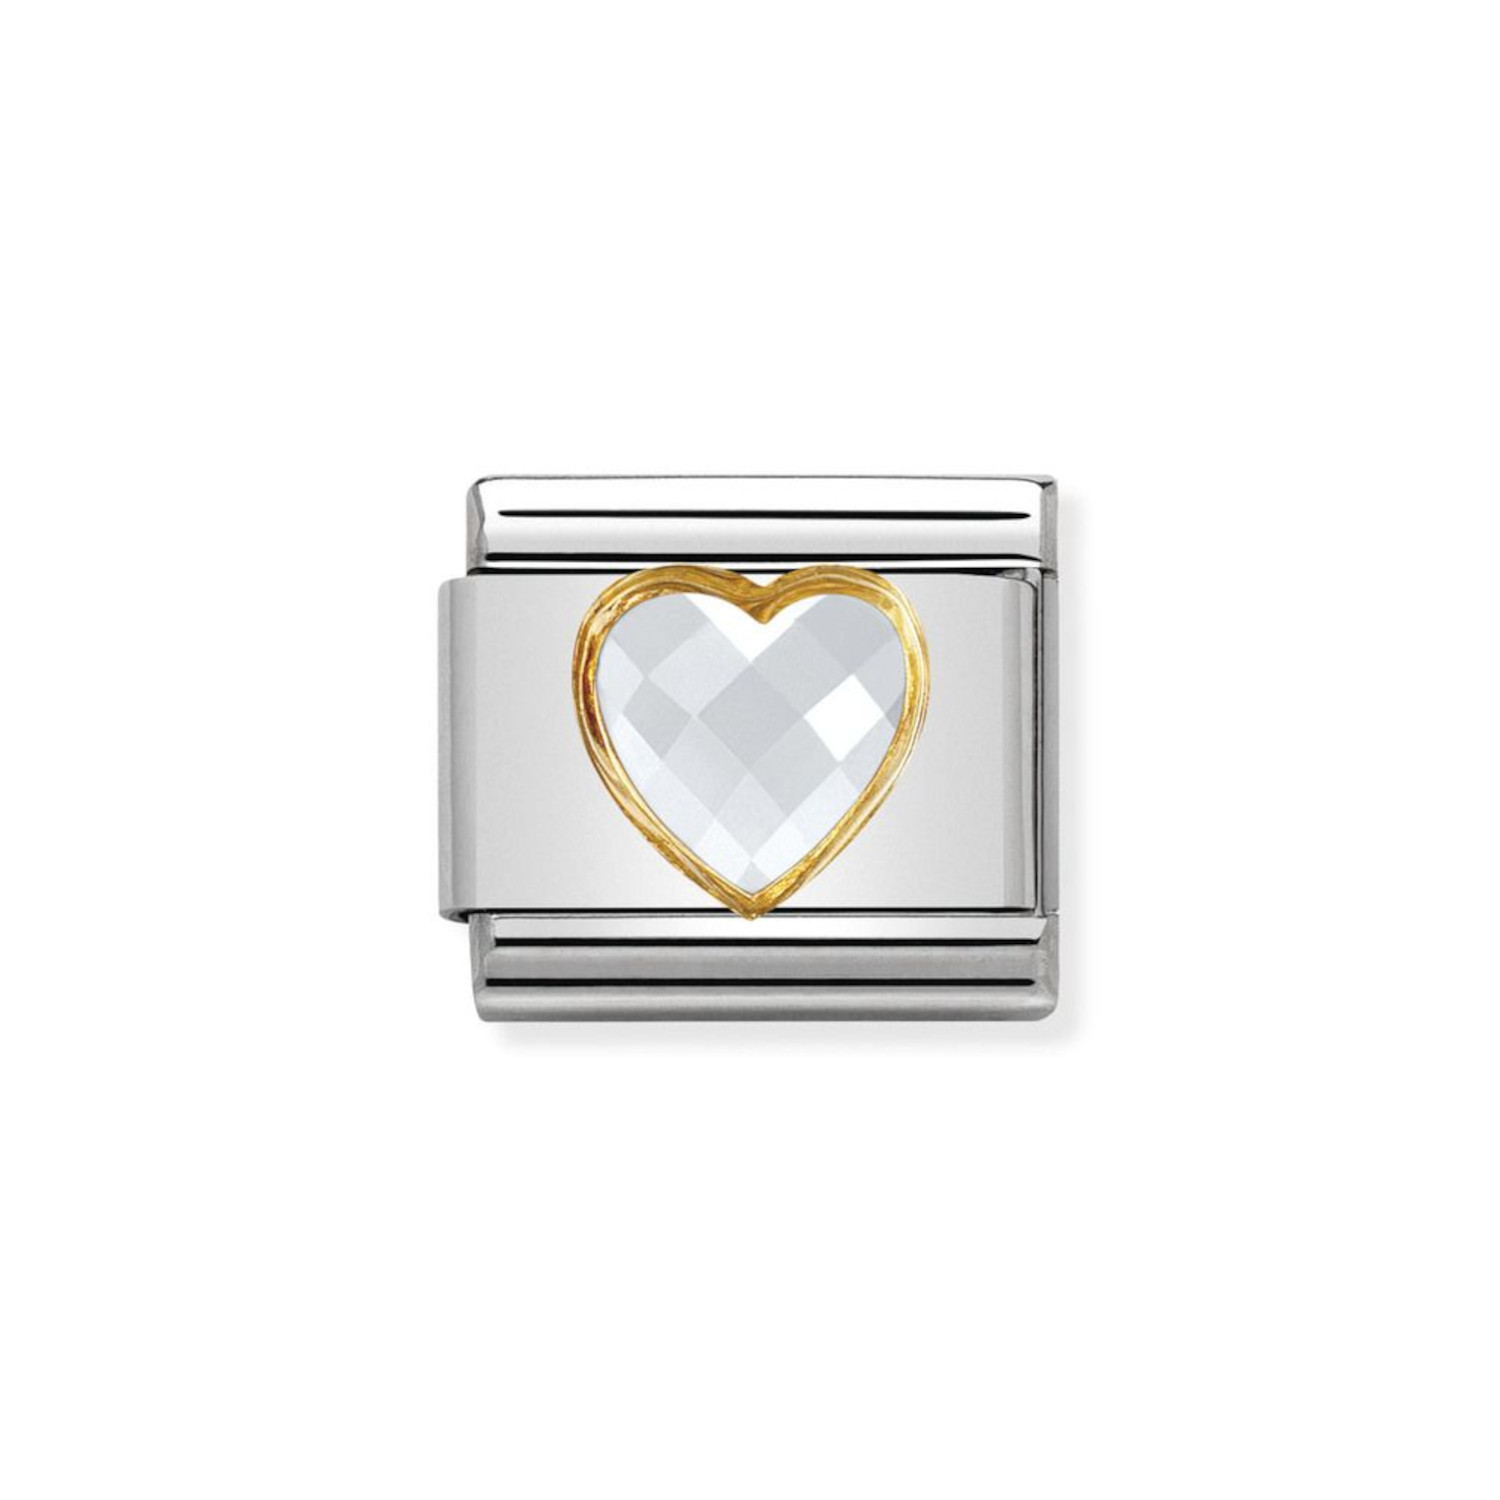 NOMINATION COMPOSABLE CLASSIC LINK IN 18K GOLD WITH MULTIFACETED WHITE HEART 030610/010